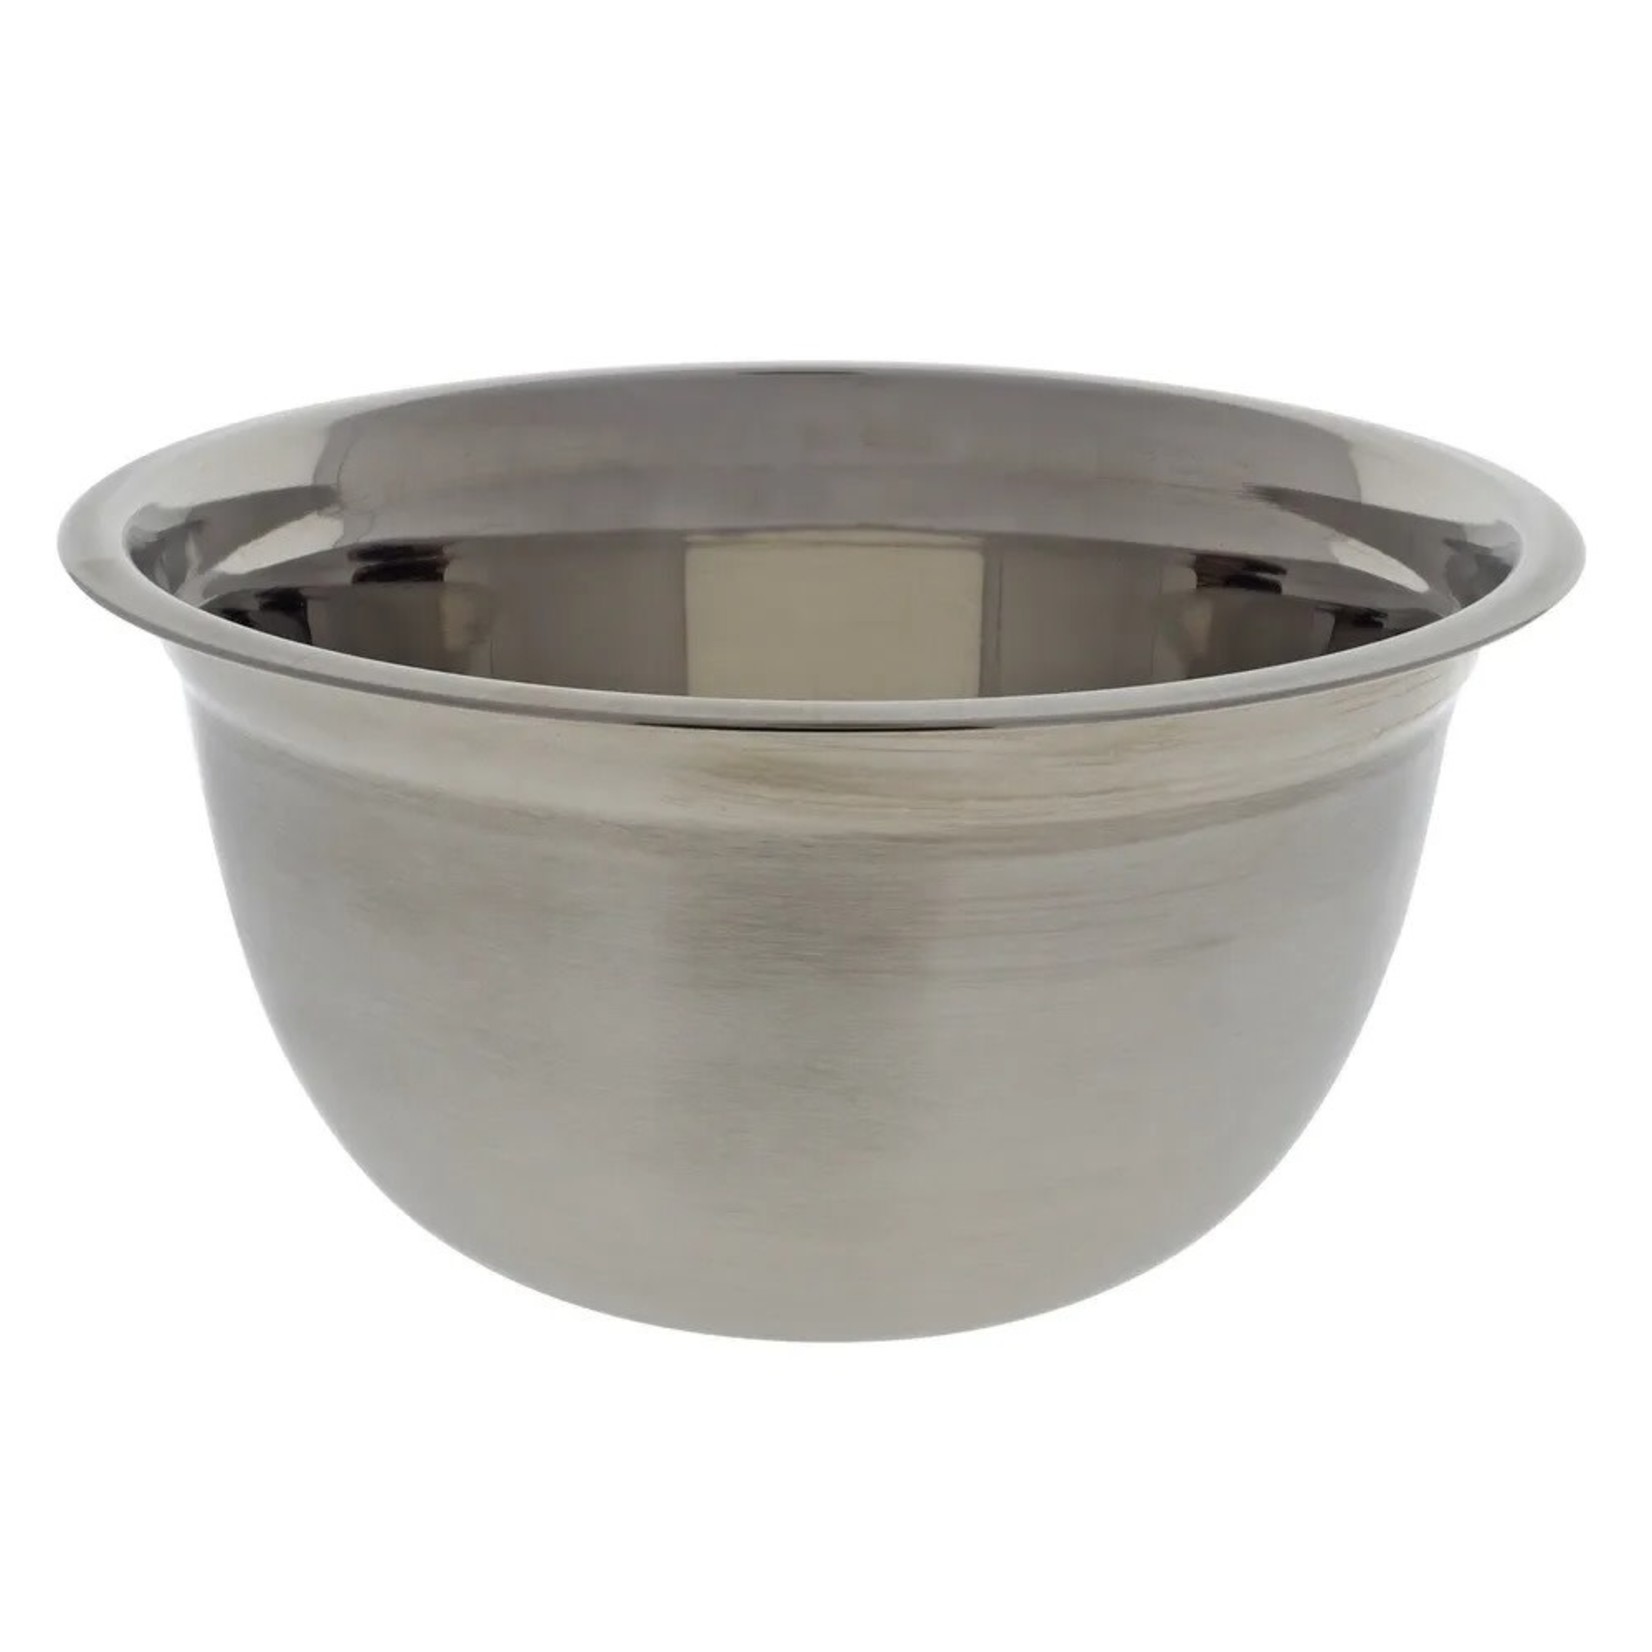 Hand Washing Bowl, Stainless Steel